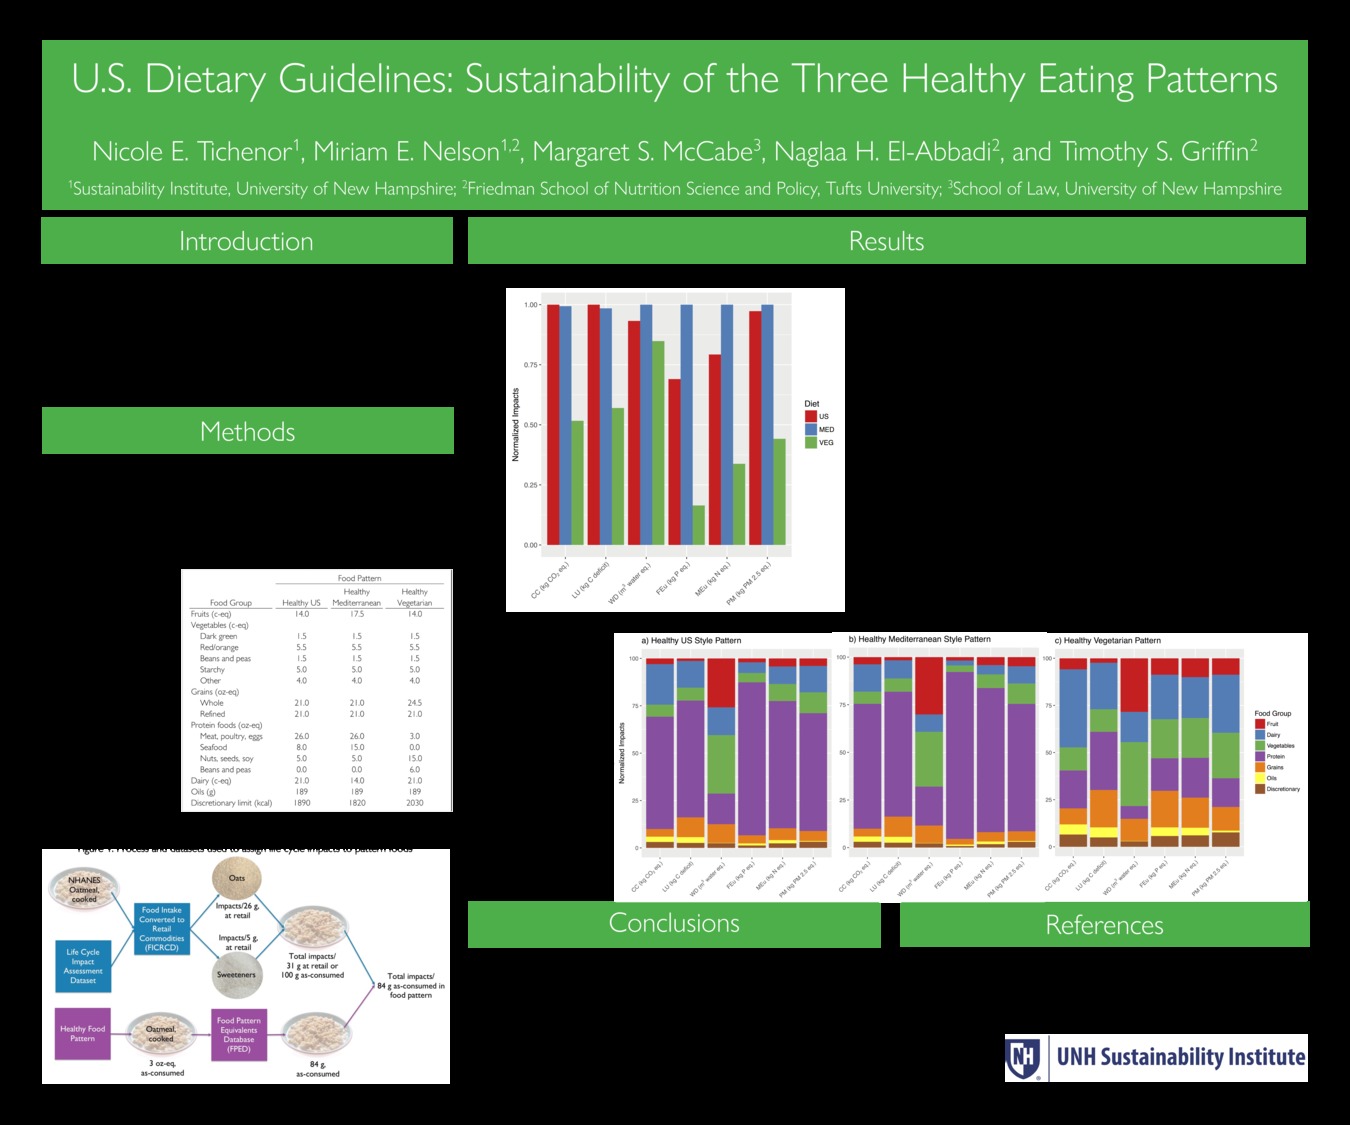 U.S. Dietary Guidelines: Sustainability Of The Three Healthy Eating Patterns by net1009